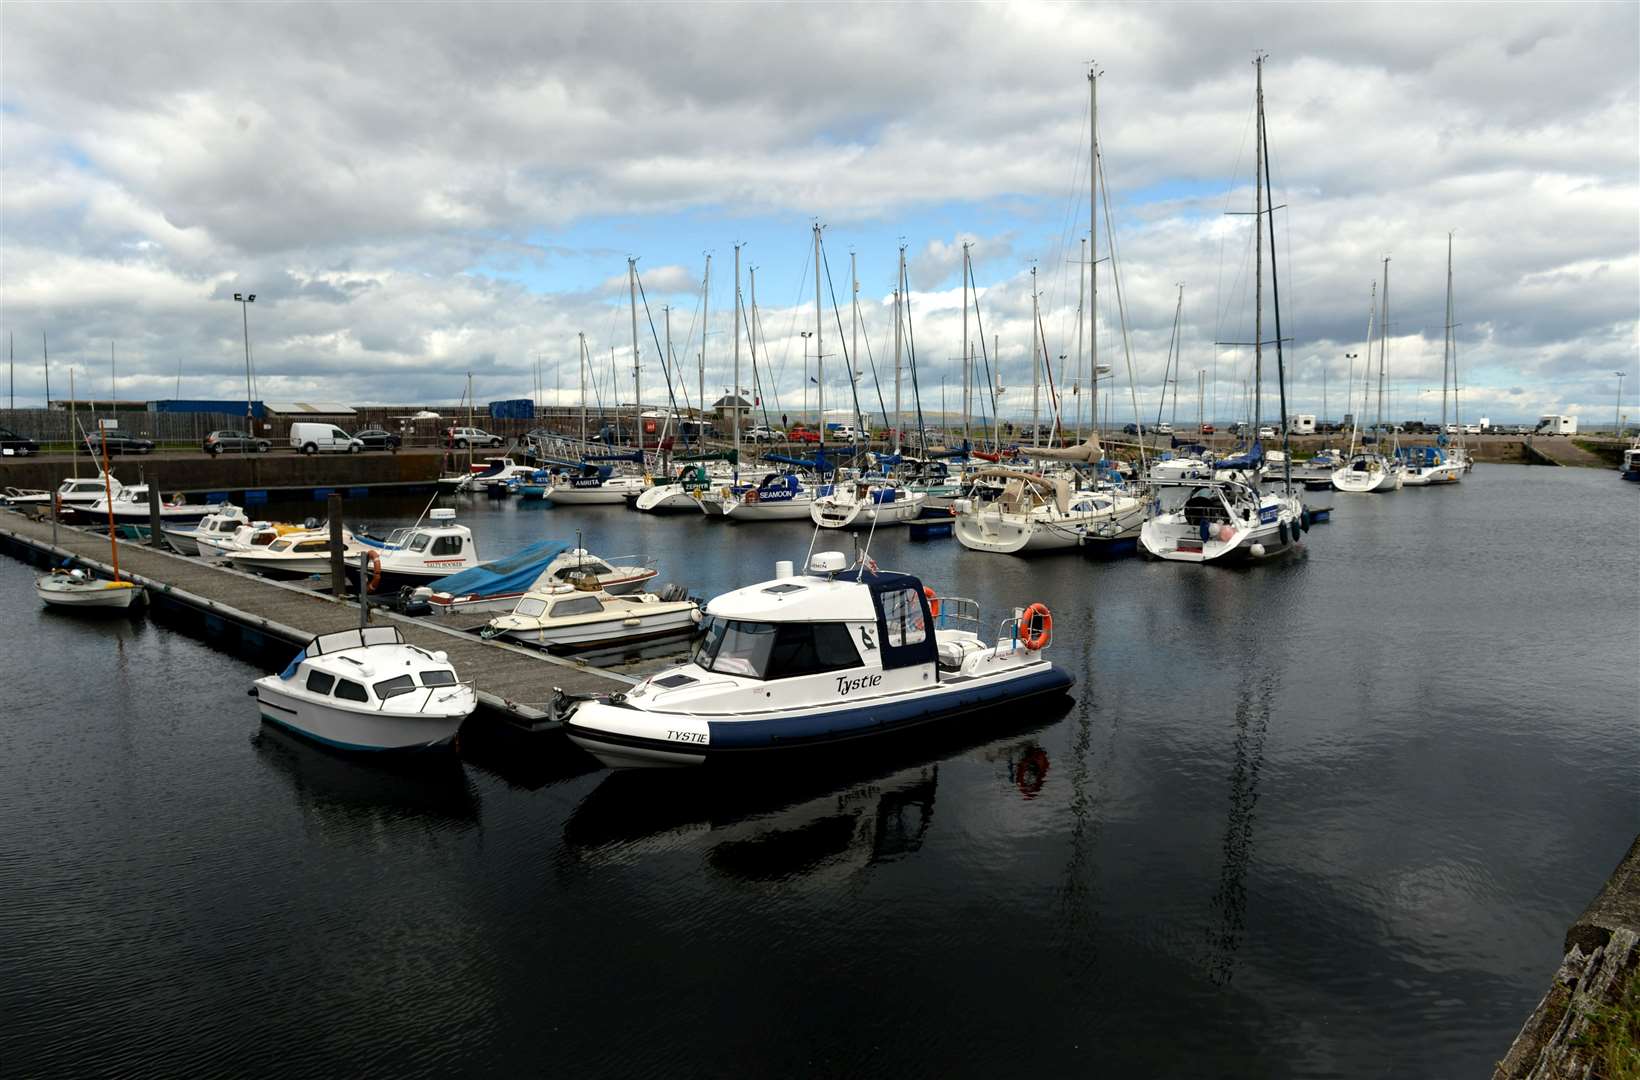 Nairn Harbour which will host a Royal Regatta to celebrate the Queen’s Platinum Jubilee on Saturday.